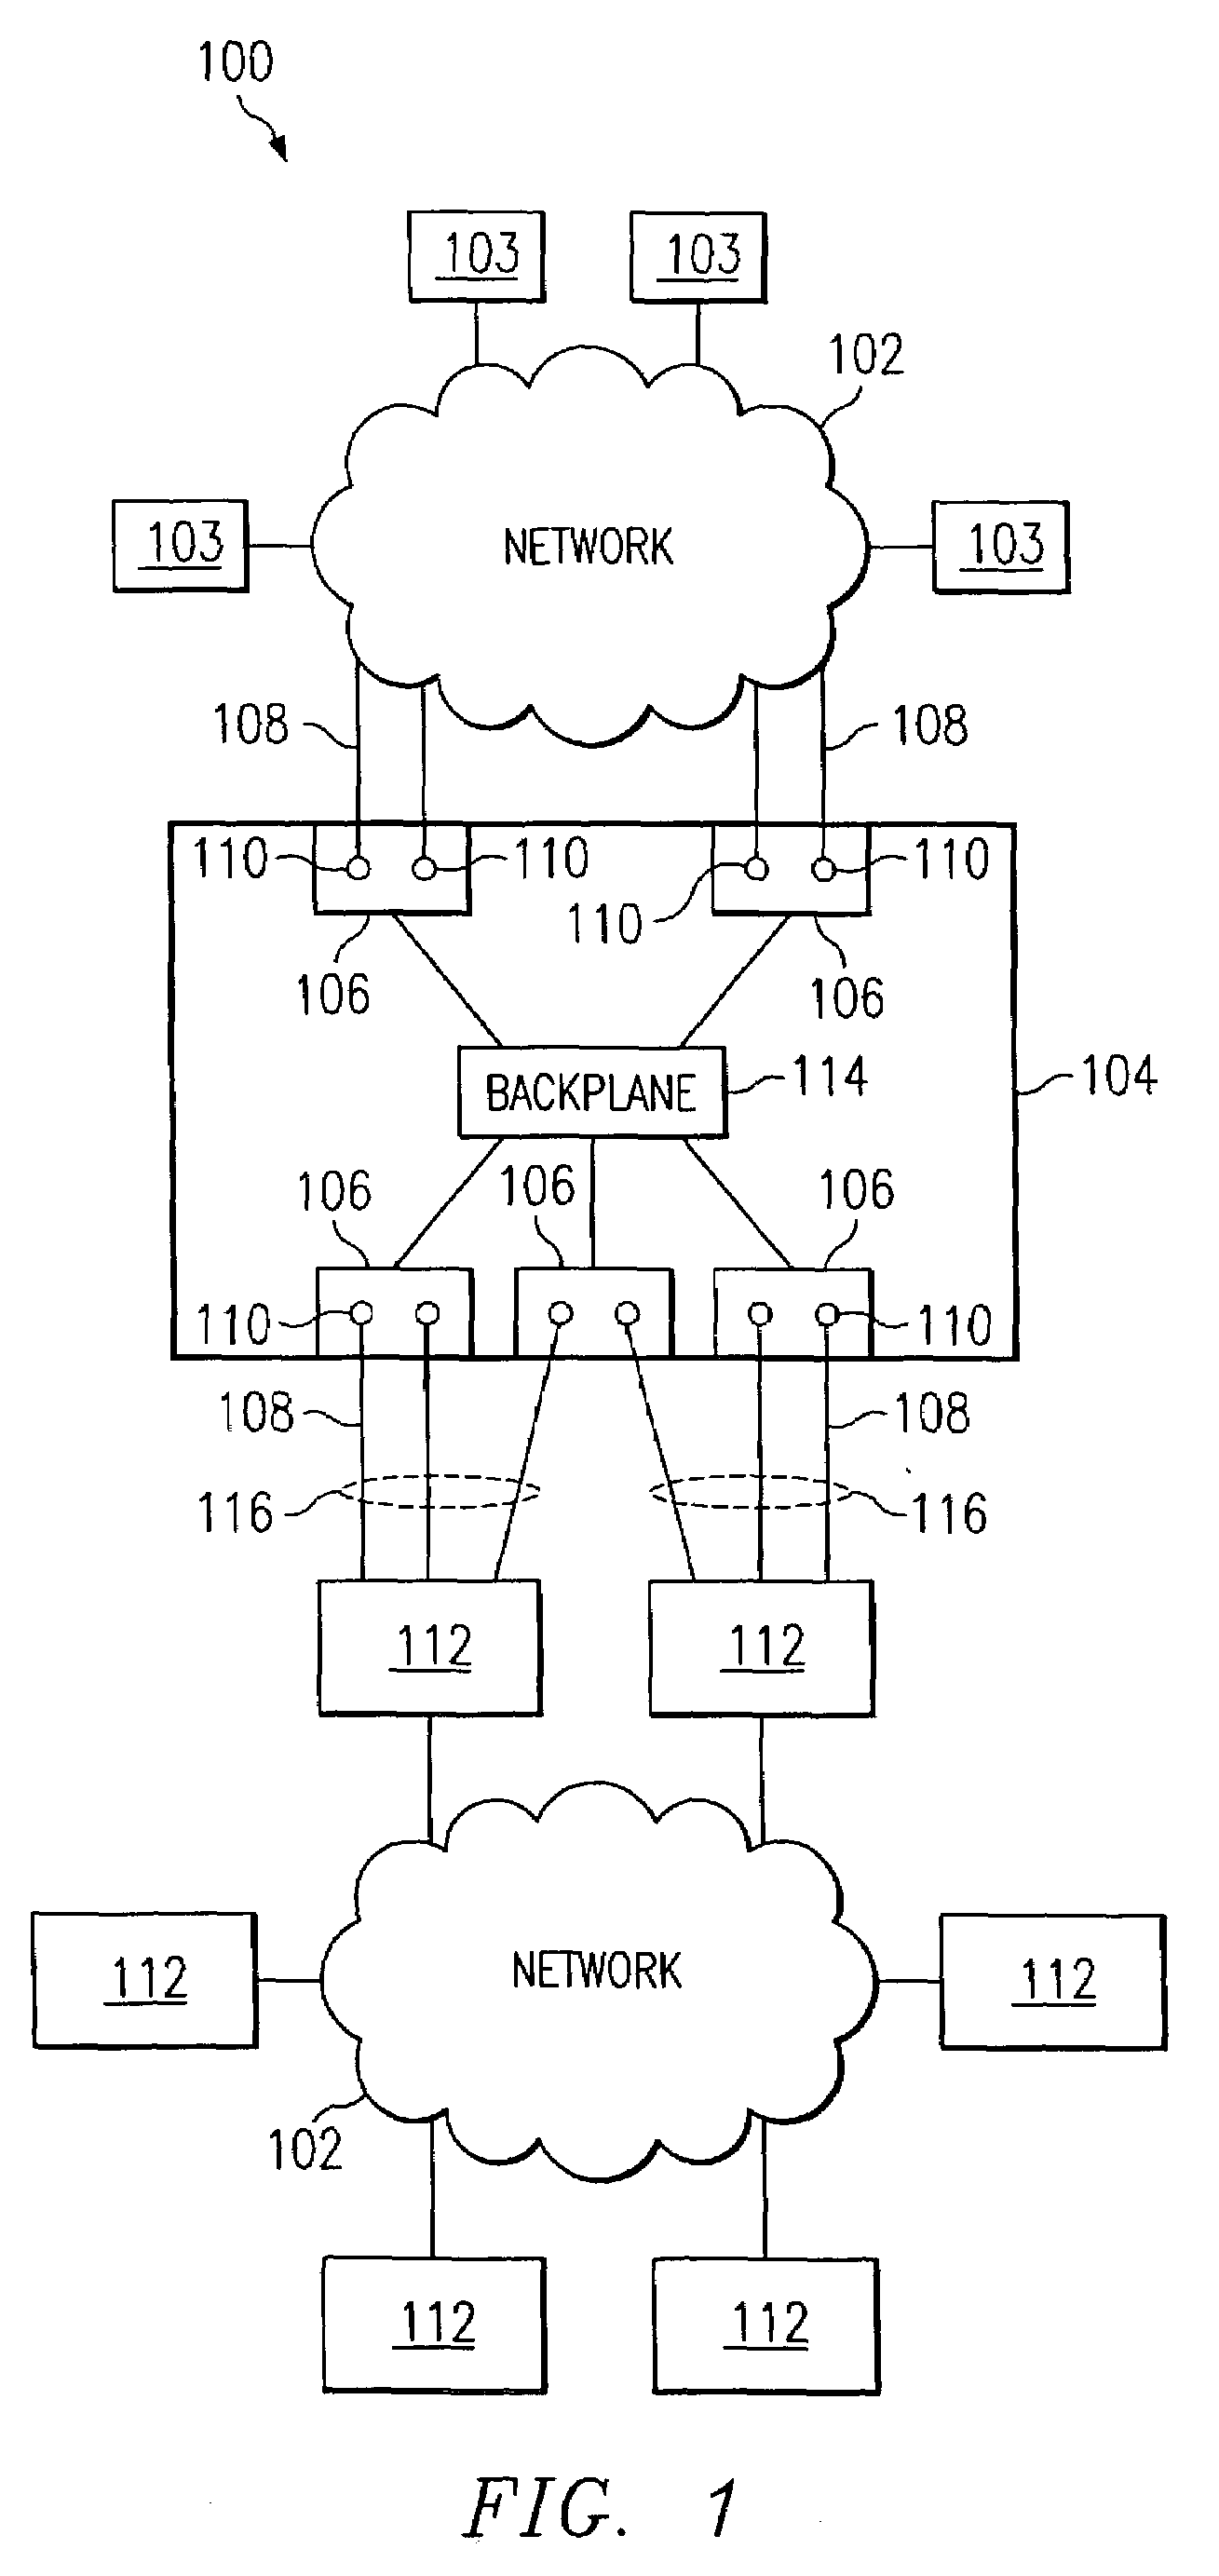 Forwarding packets to aggregated links using distributed ingress card processing